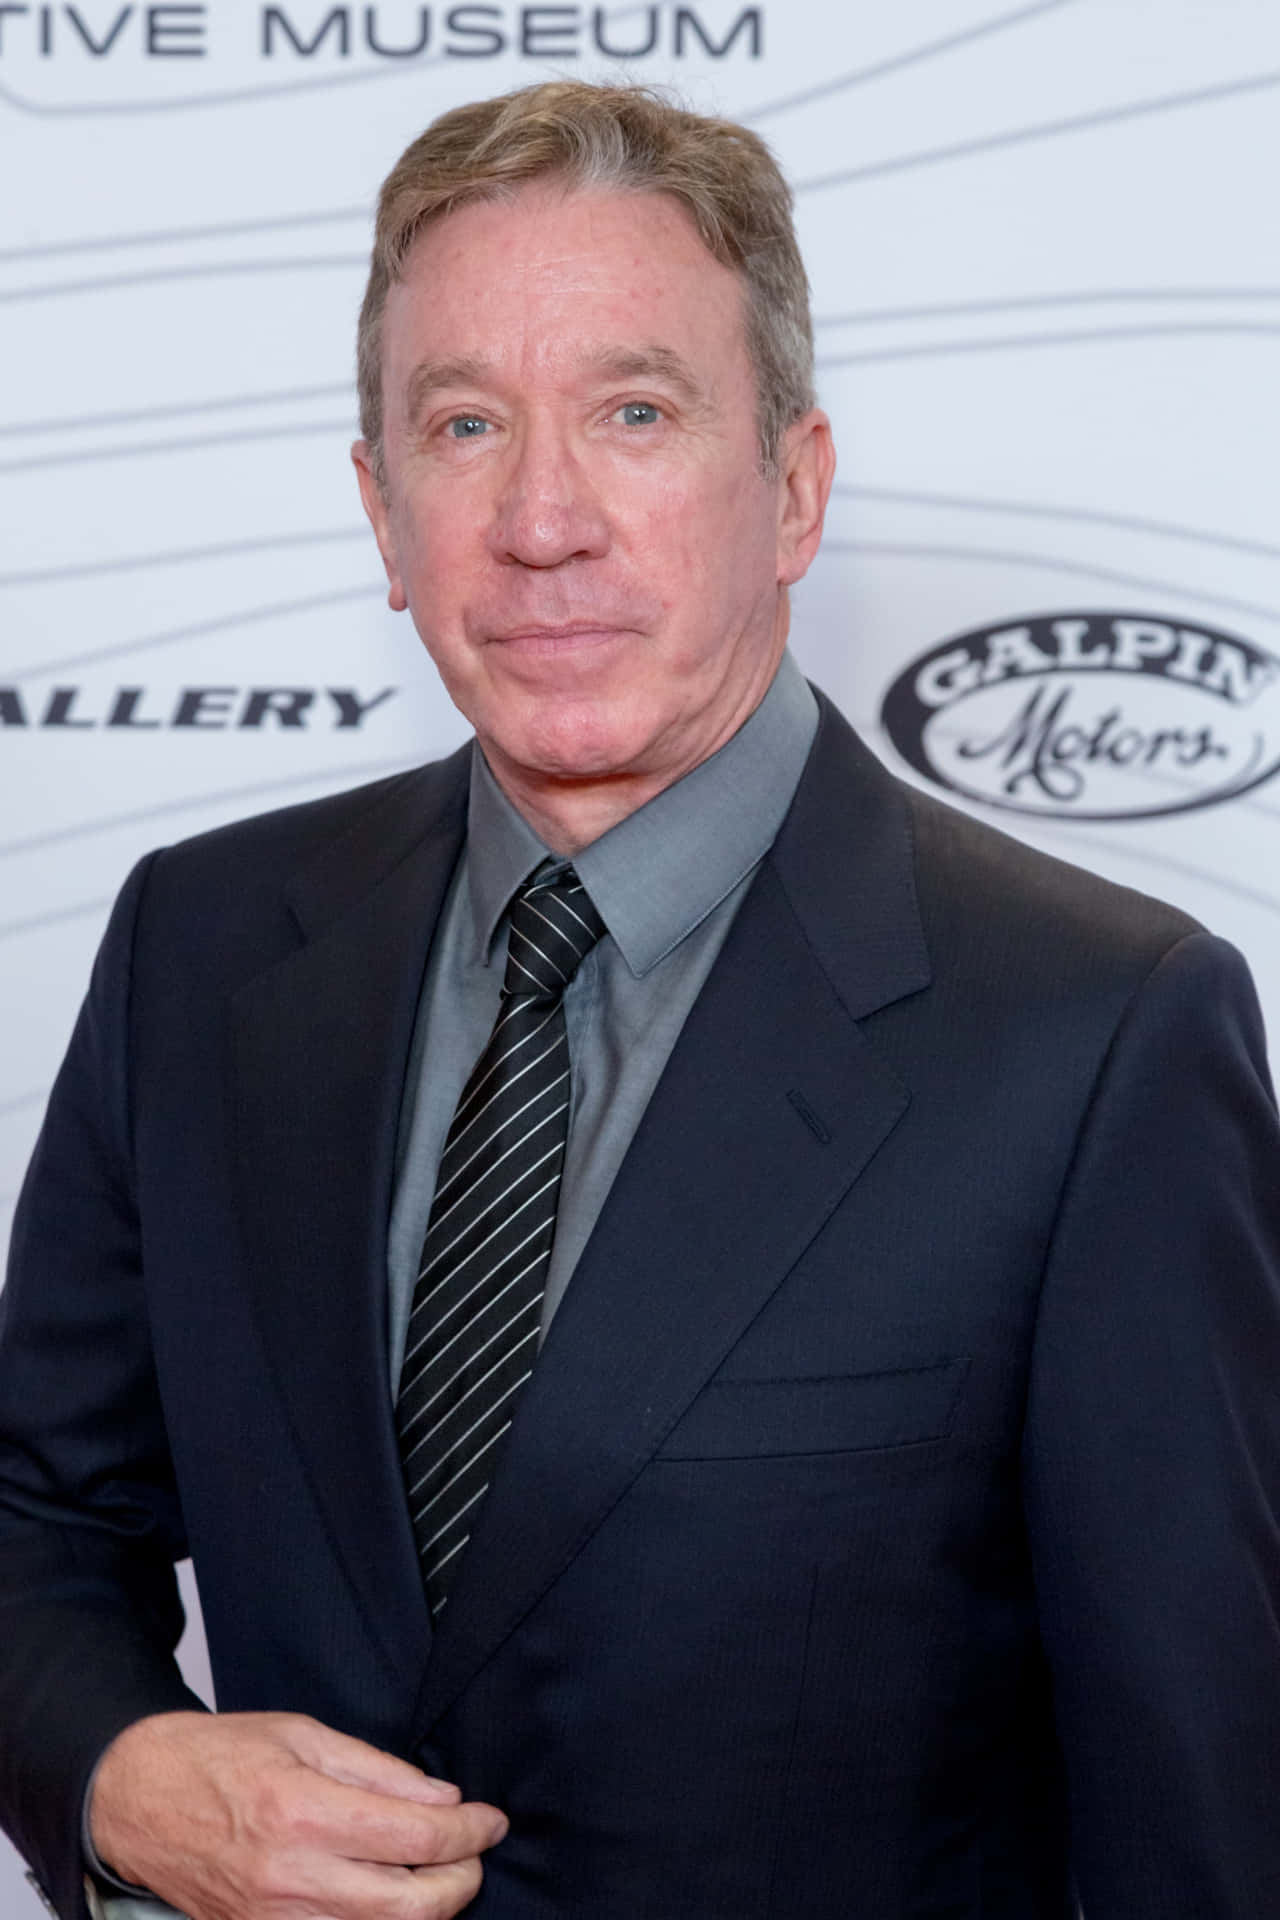 Tim Allen expresses his warm smile on the red carpet Wallpaper